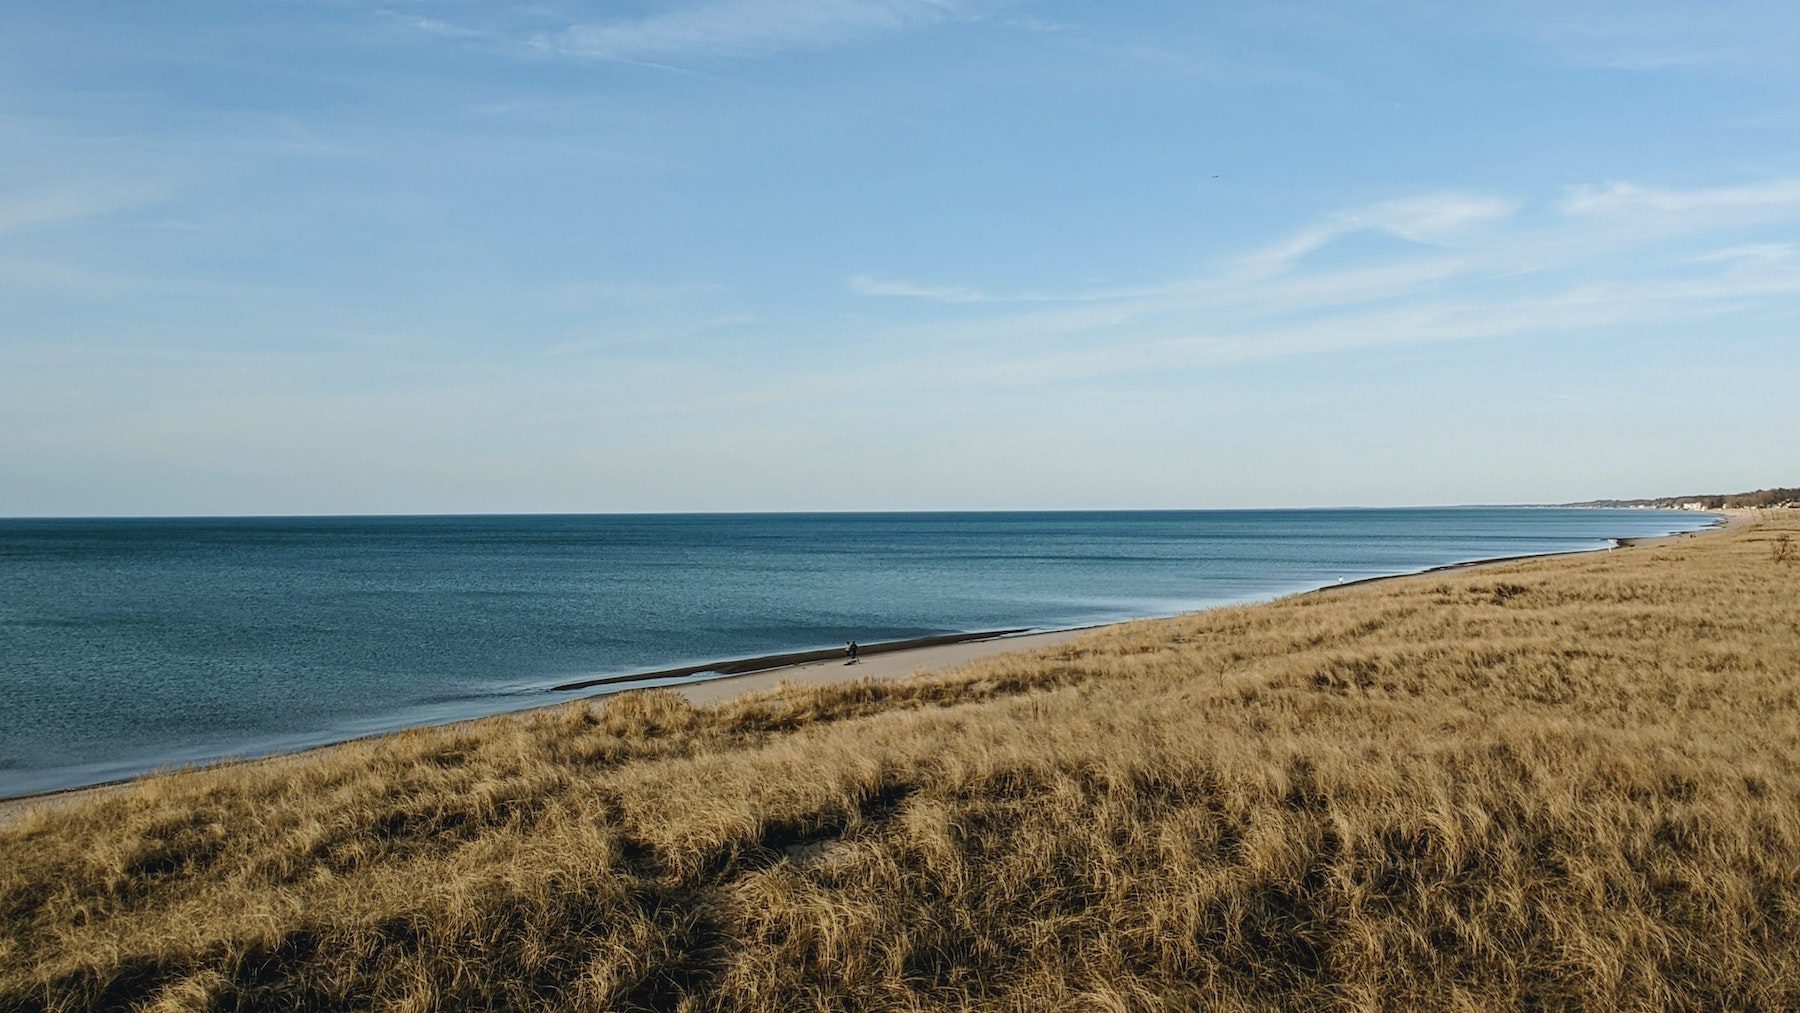 The shoreline of Lake Michigan near Indiana Dunes on a bright, clear day.